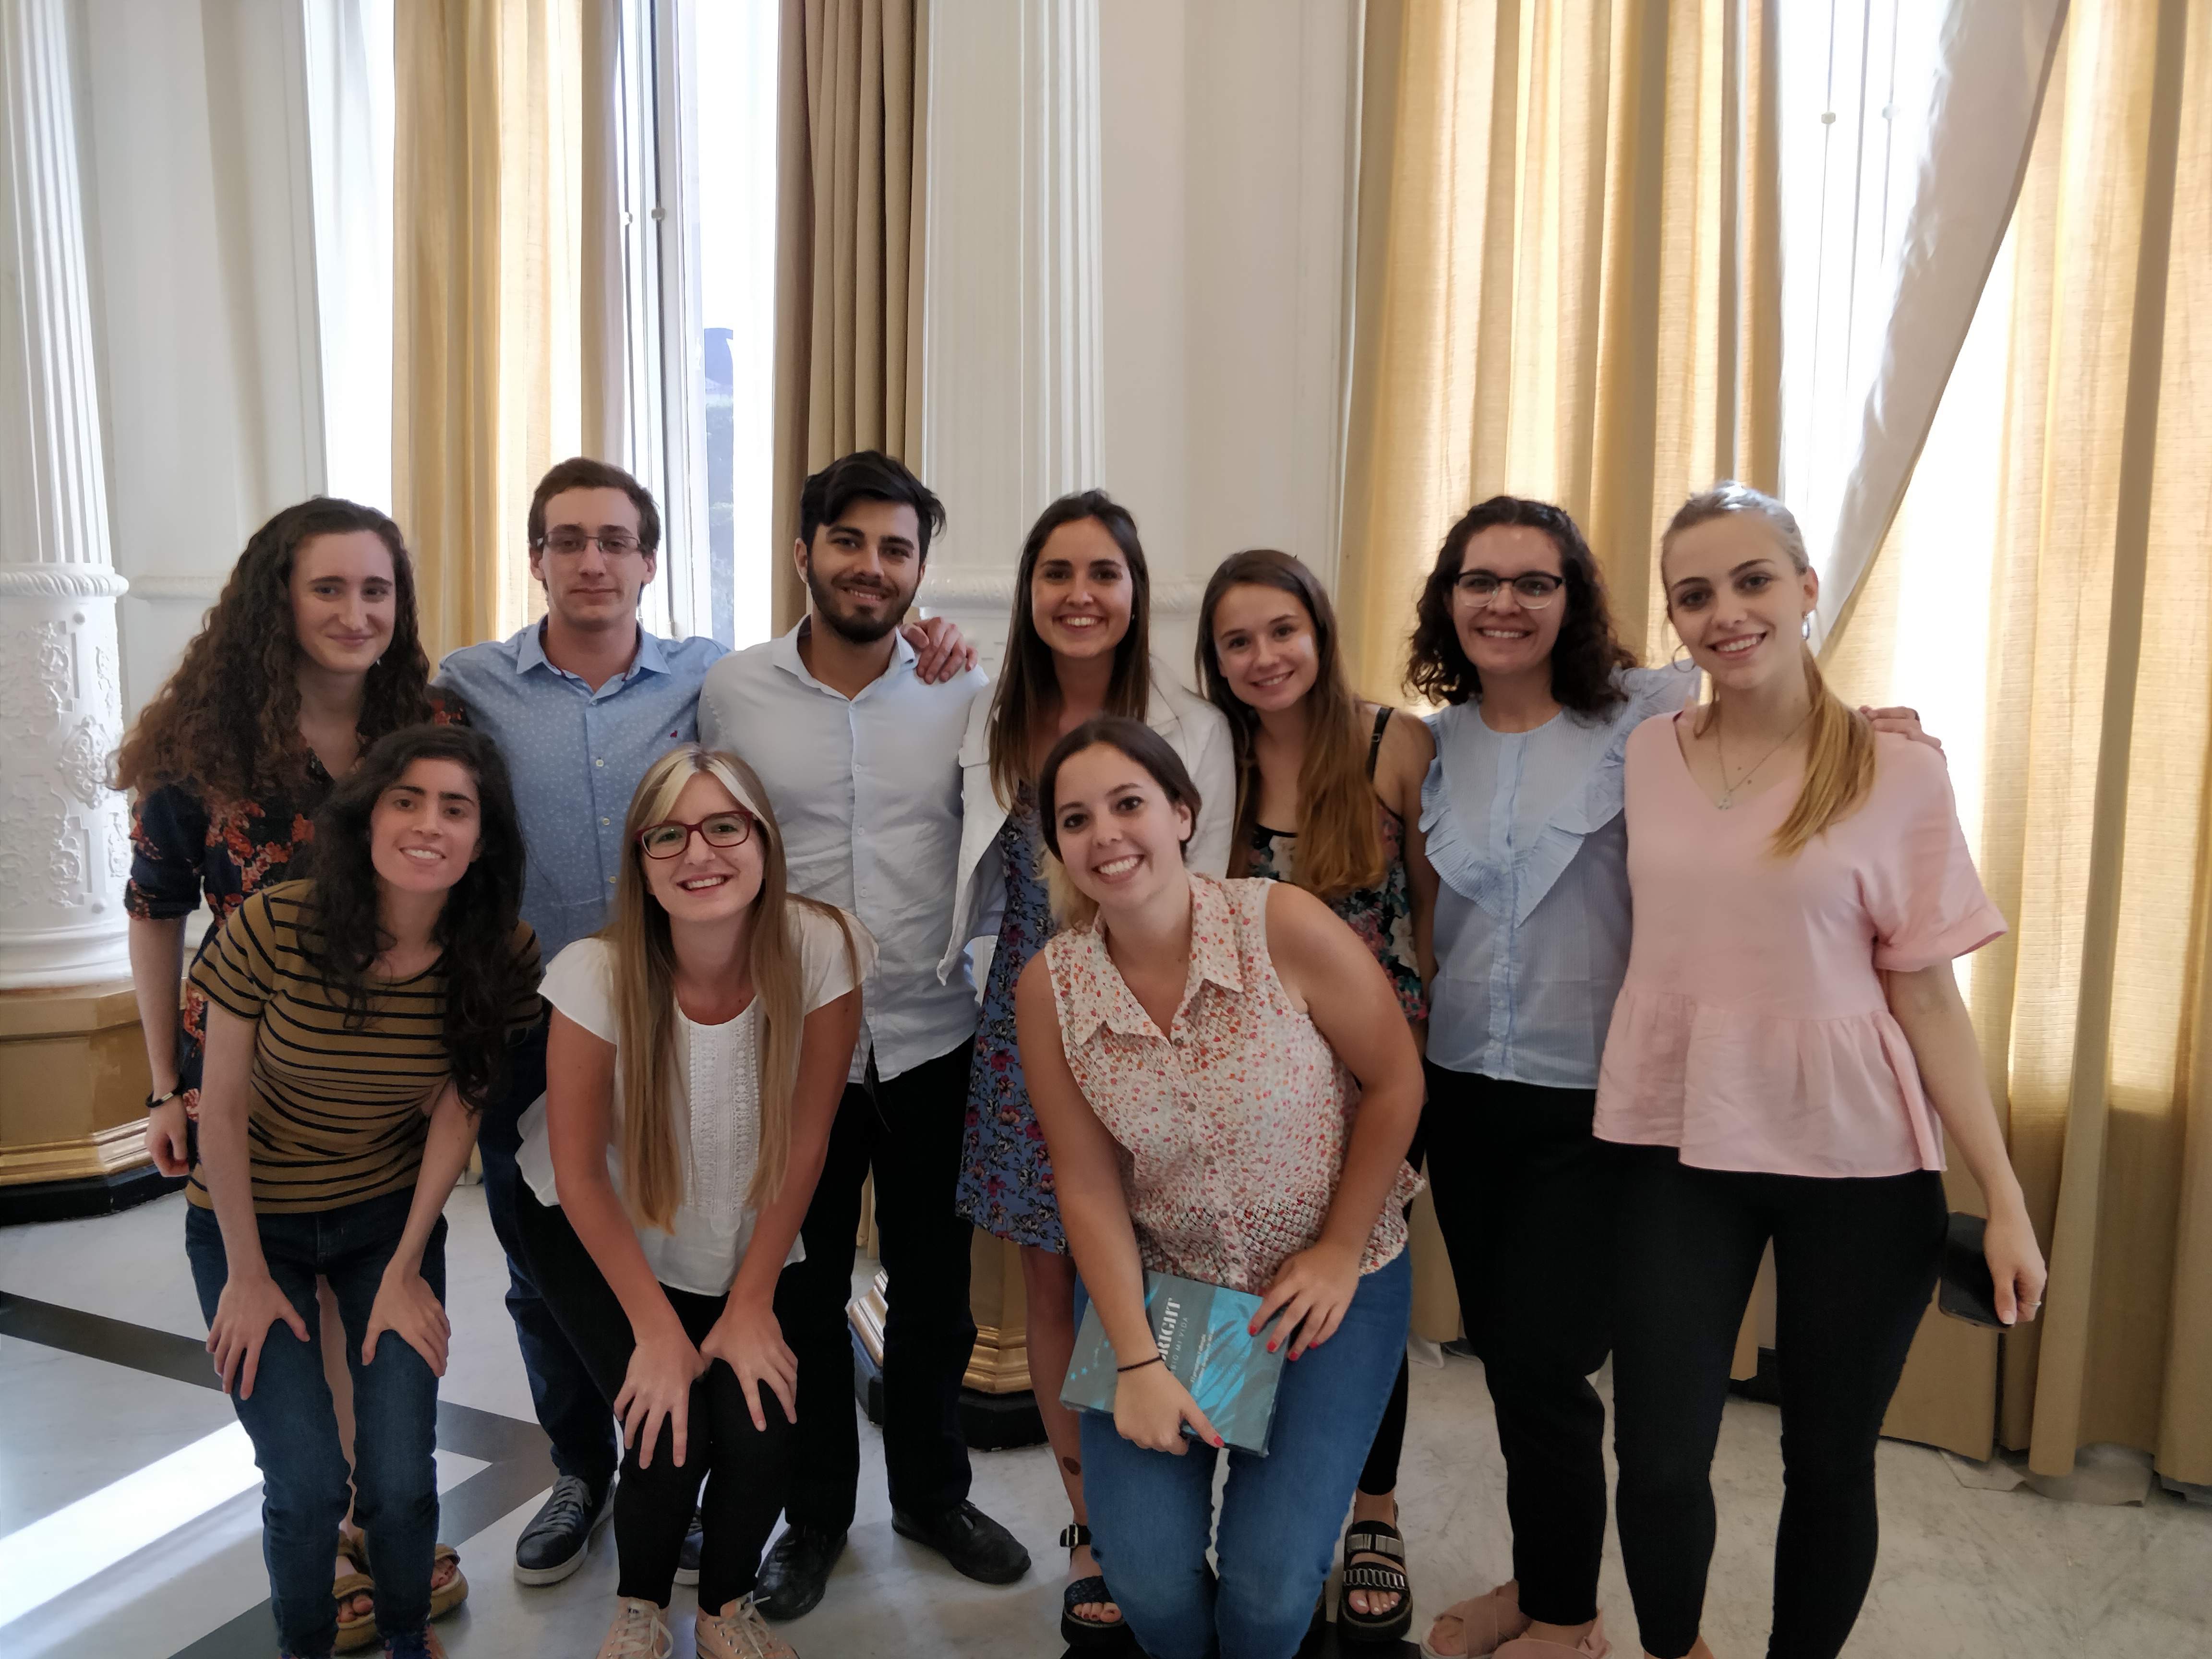 The 2019 Friends of Fulbright Argentine students completed their orientation with the Fulbright Commission Argentina in December and will arrive in Nebraska on February 2.